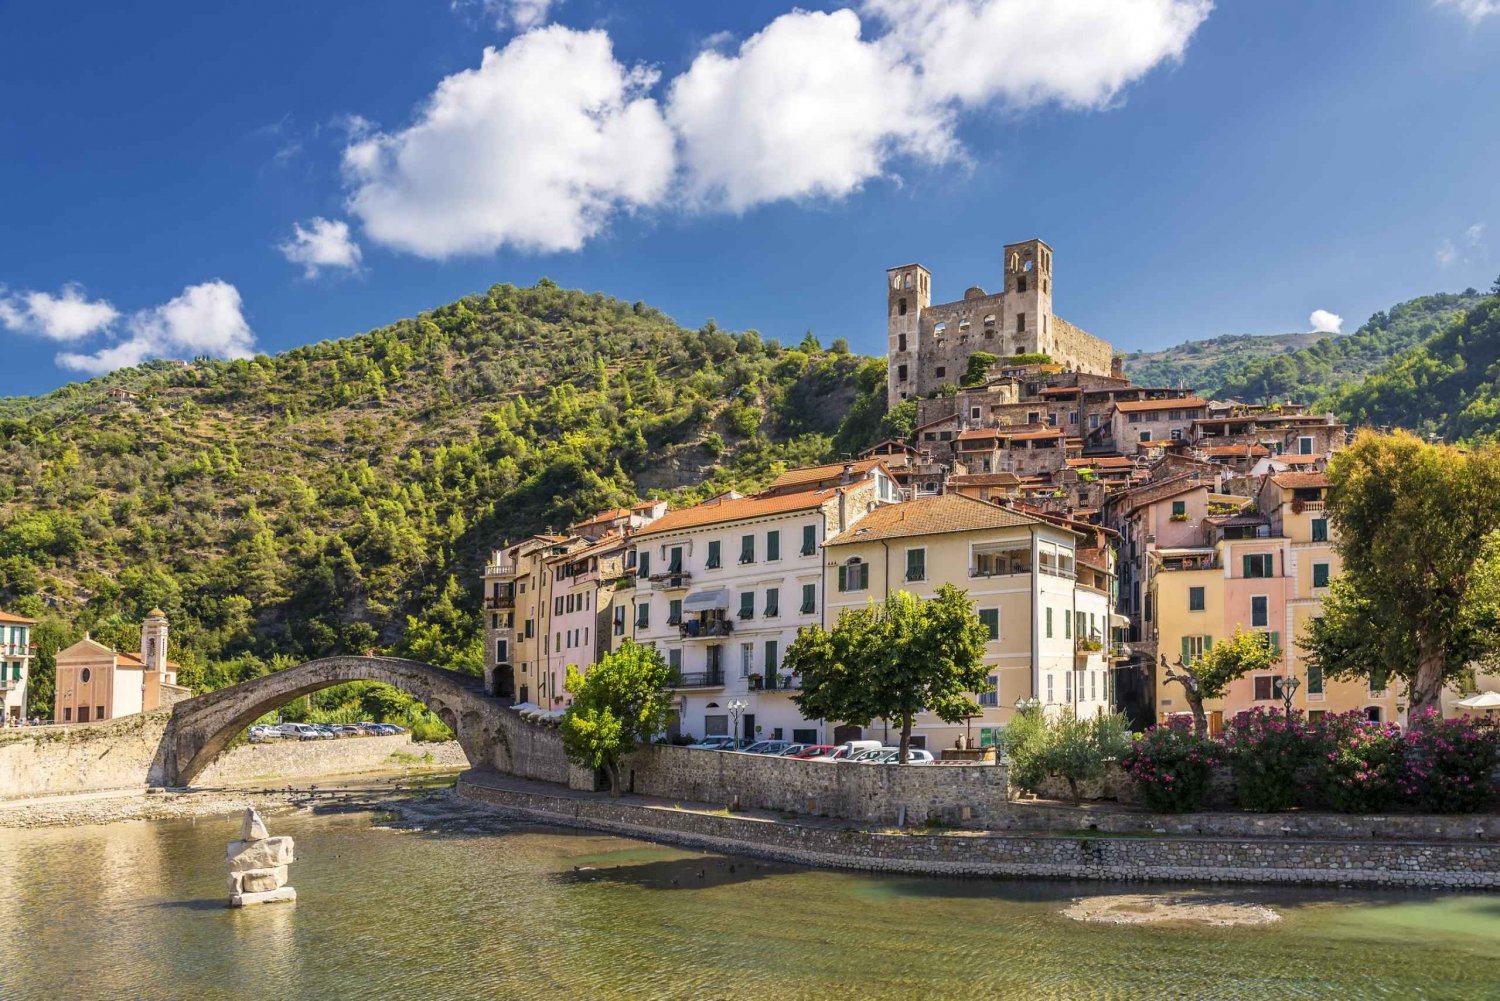 The Italian Riviera: Full-Day Tour from Nice